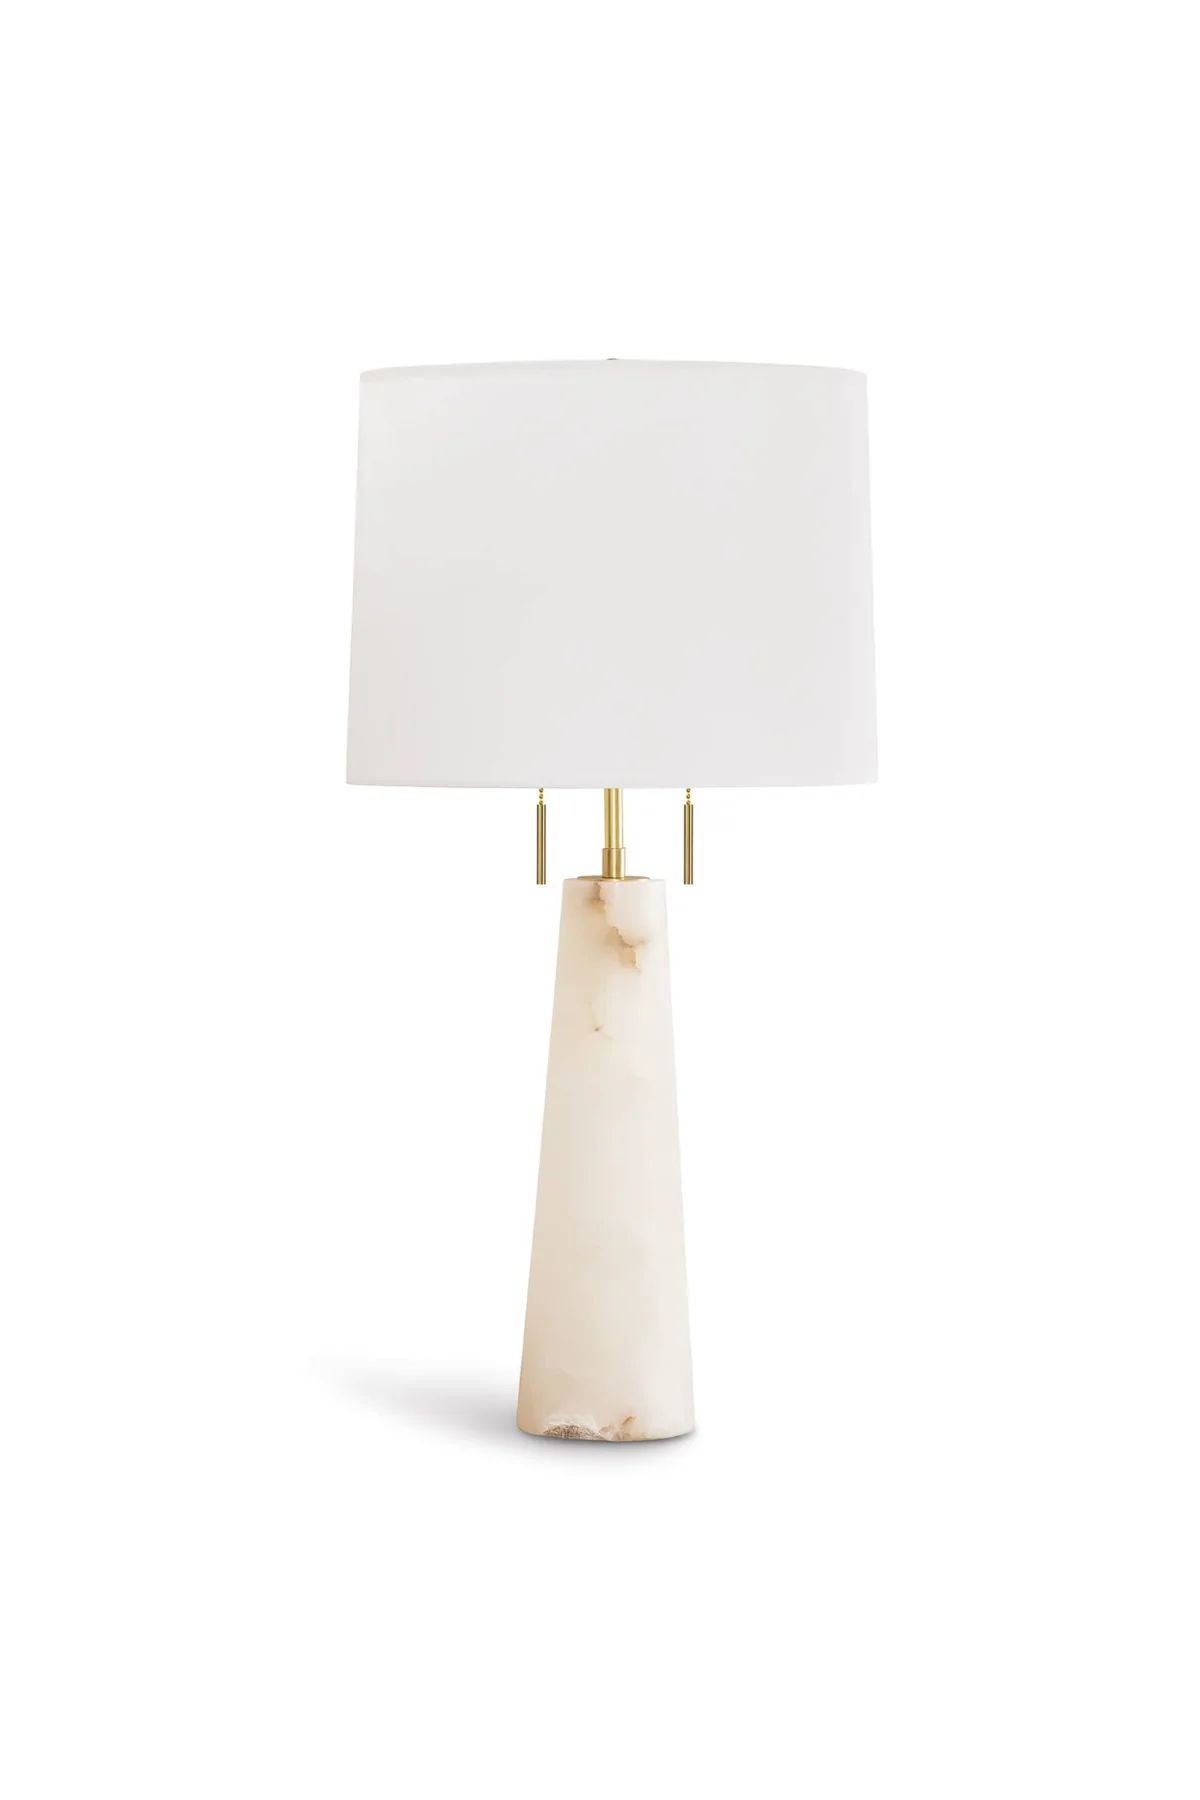 Southern Living Austen Alabaster Table Lamp | THELIFESTYLEDCO